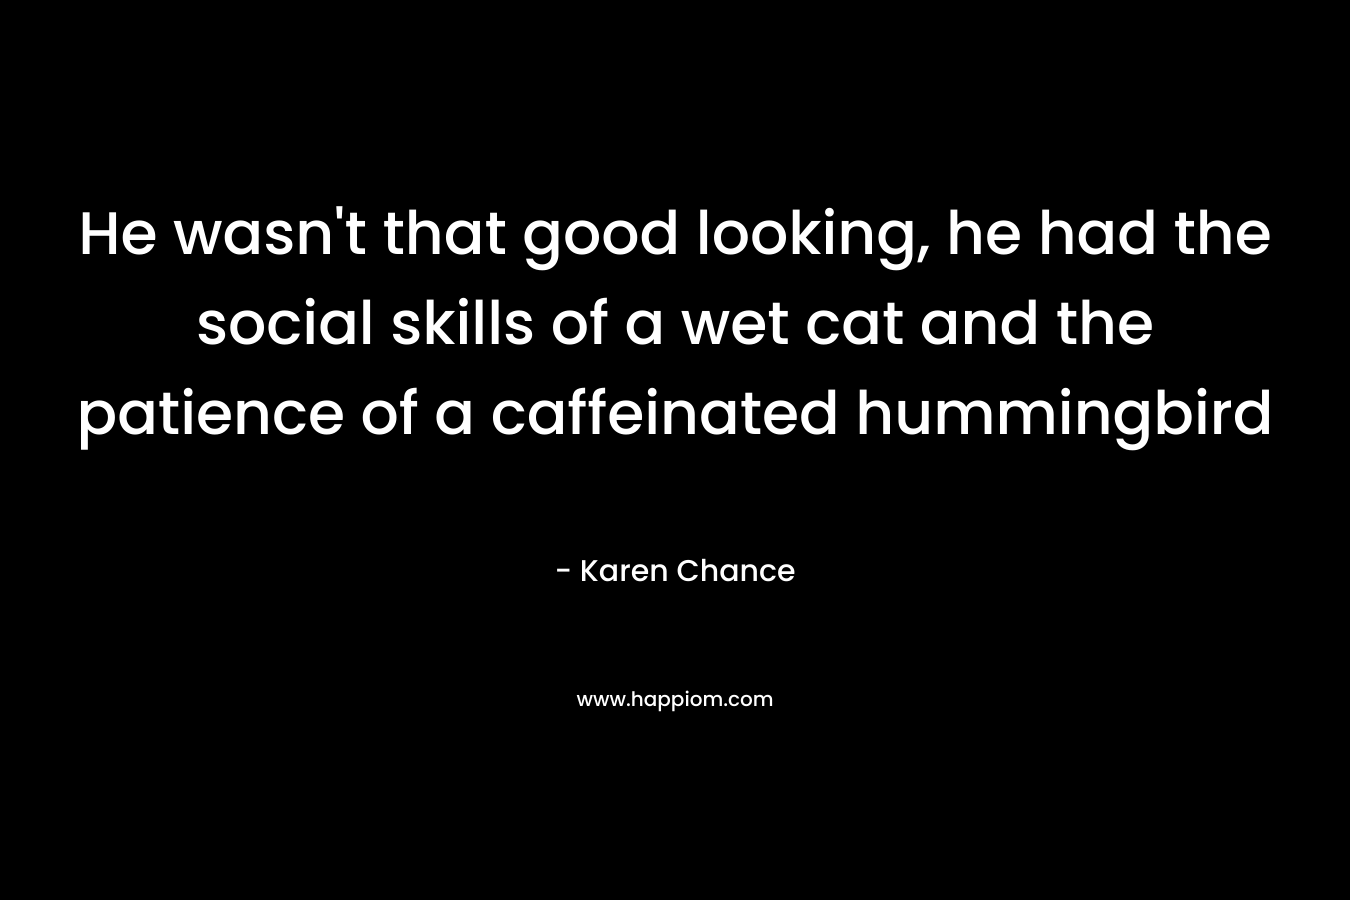 He wasn’t that good looking, he had the social skills of a wet cat and the patience of a caffeinated hummingbird – Karen Chance